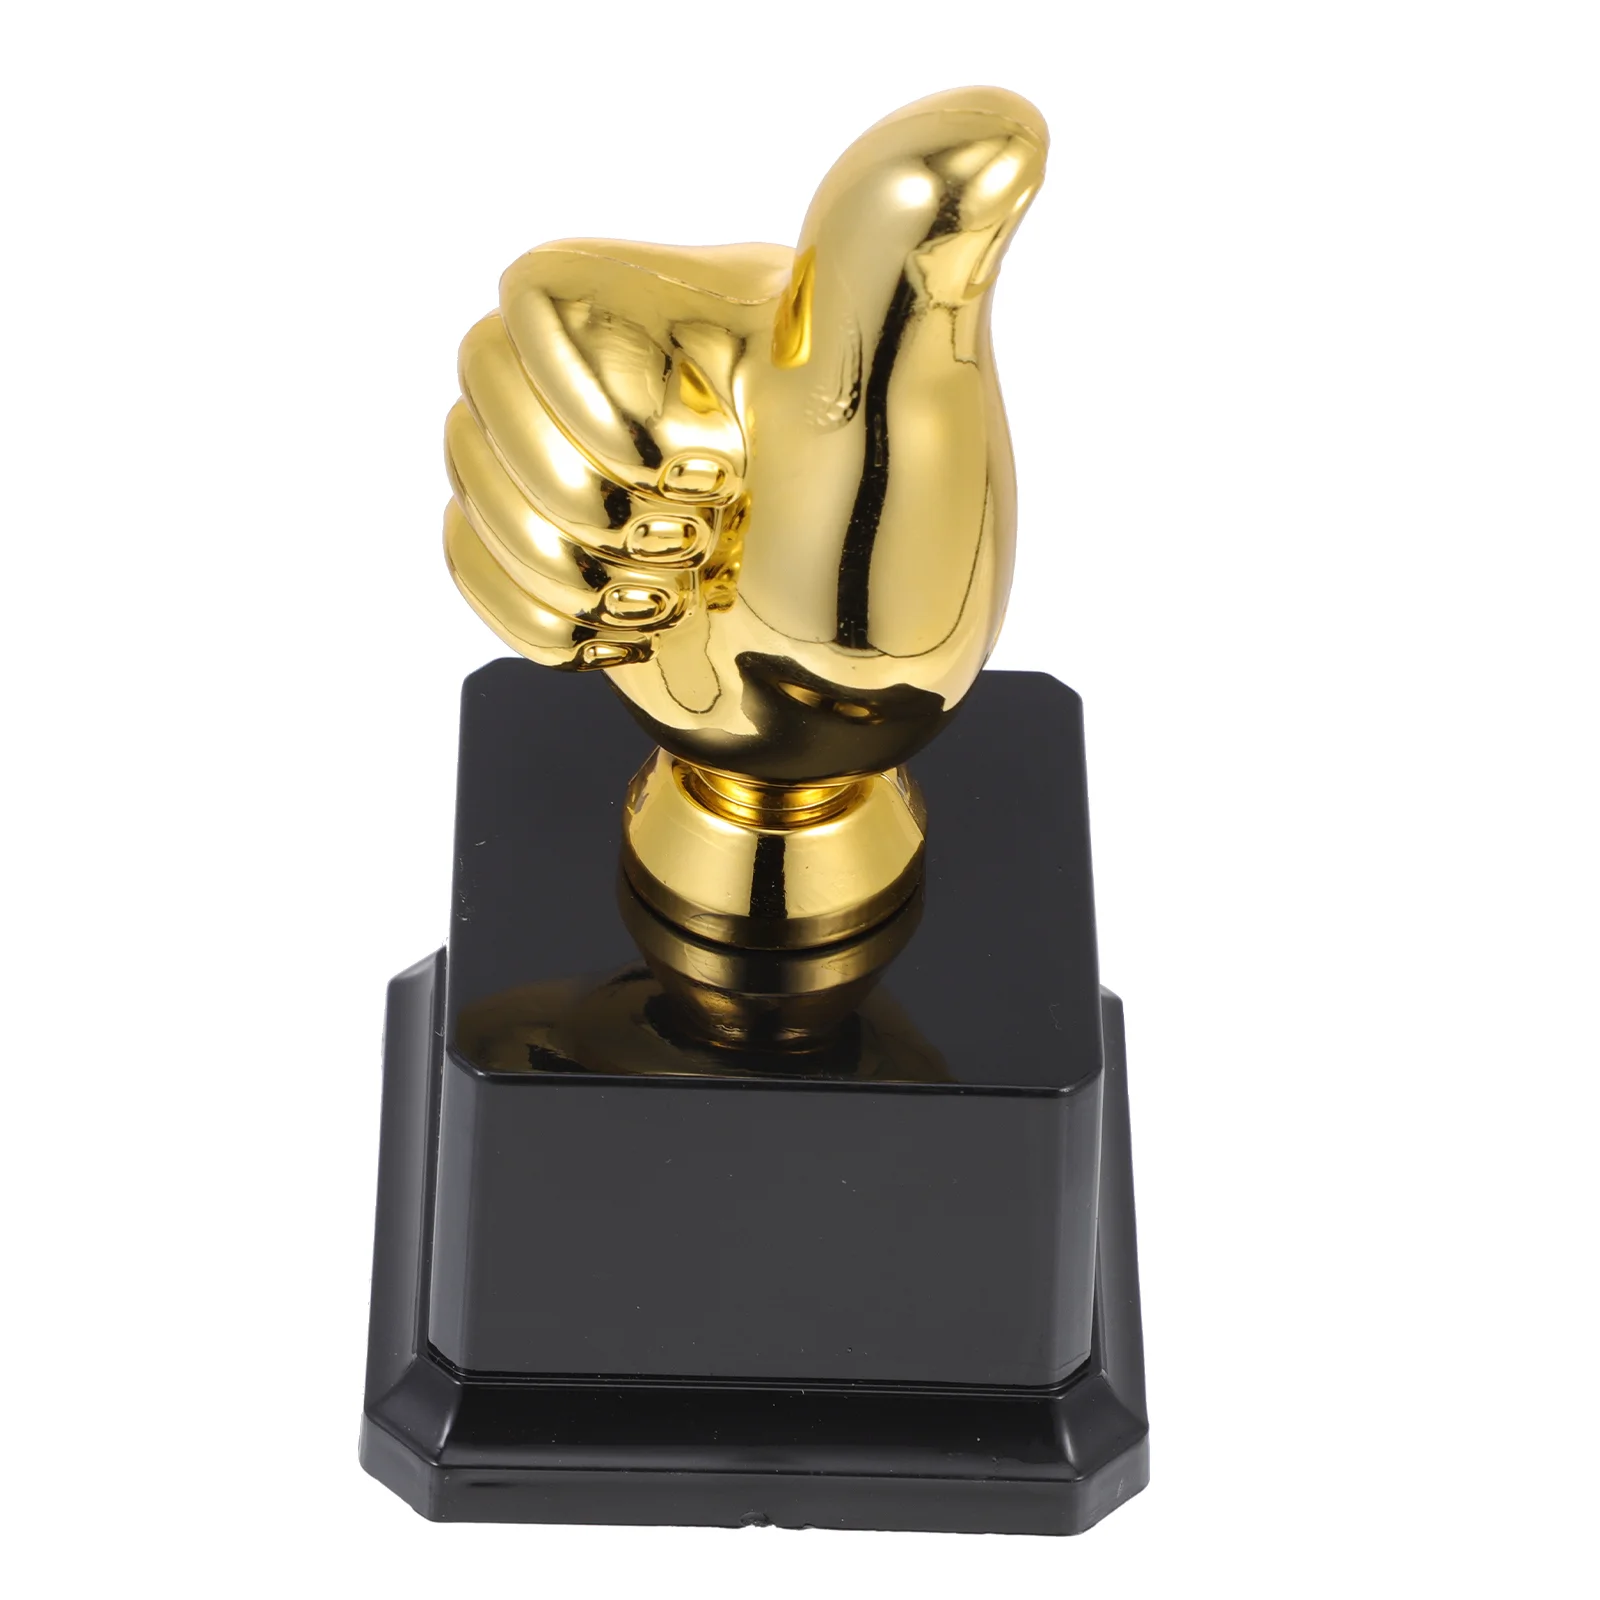 Trophy Awards Thumb Up Award Trophy Awards Plastic Golden Rewards Trophies Gold Awards Trophies Party Favors Sports Competition 1 pcs trophy cup for sports meeting competitions soccer winner team awards and competition parties favors gold metal